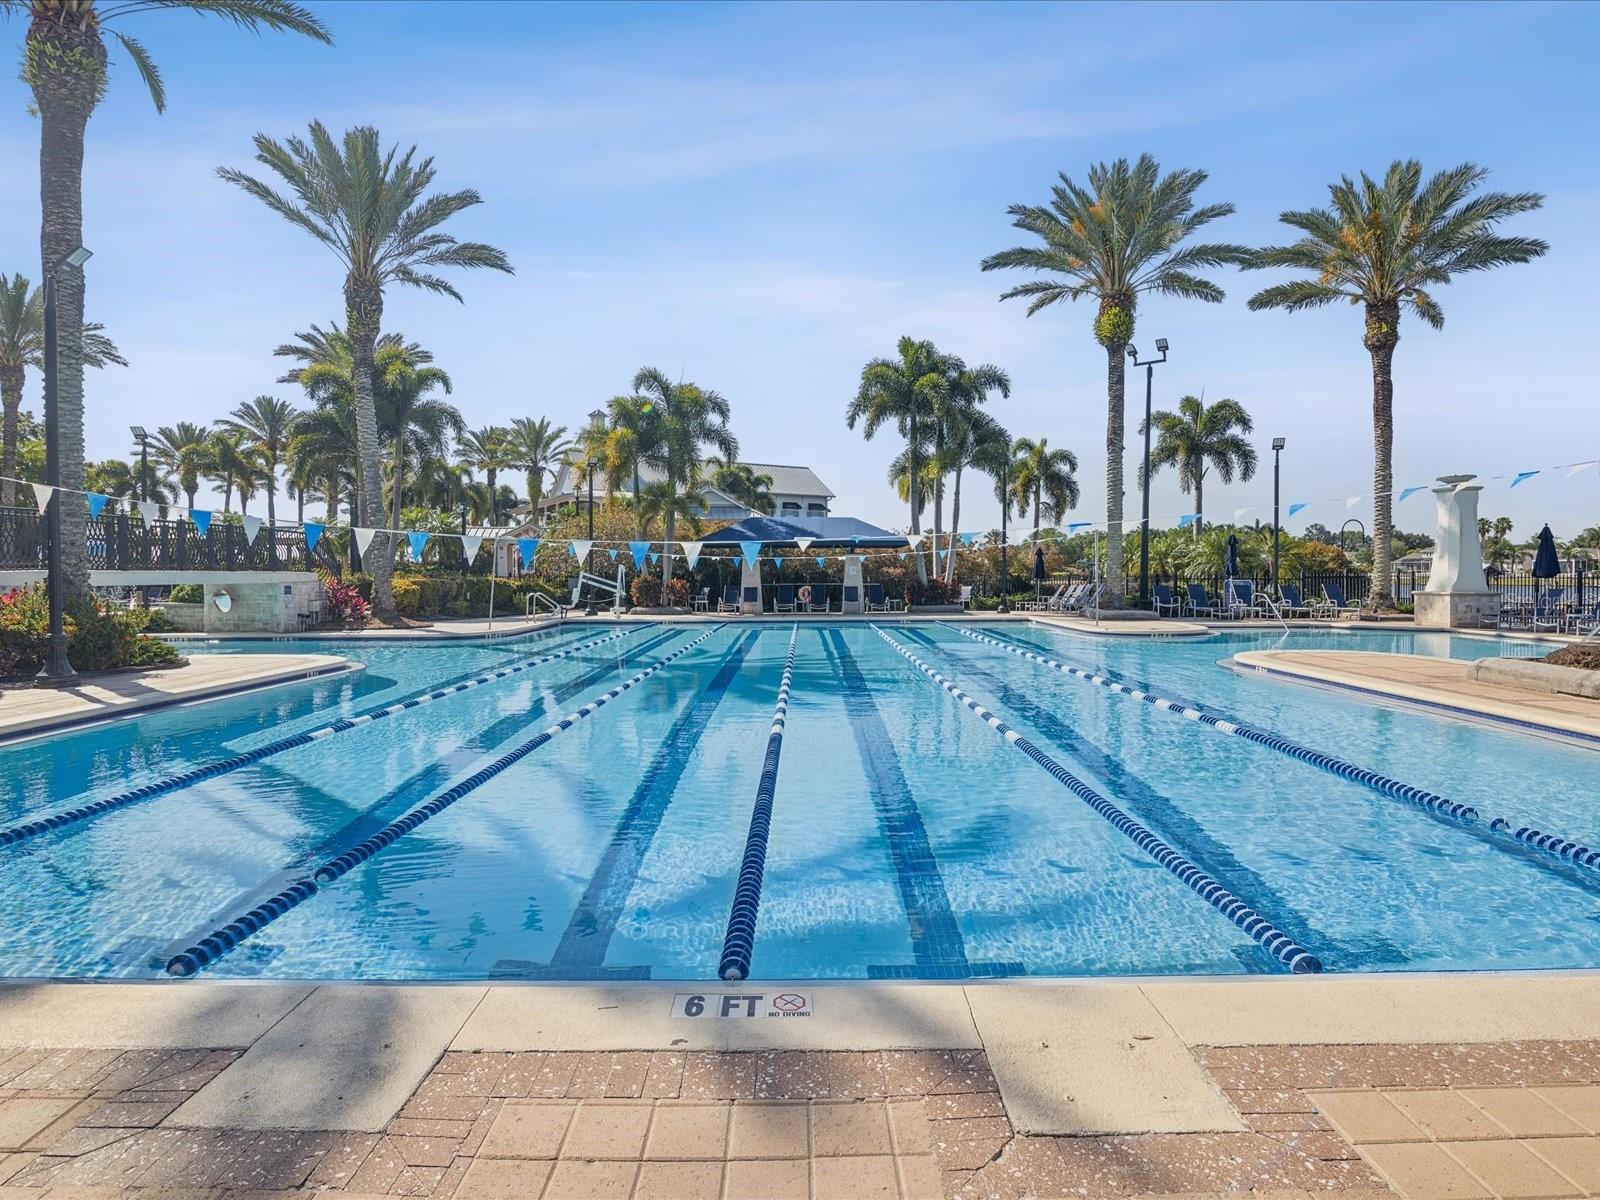 Stay in shape with this lap pool in the adult only area.